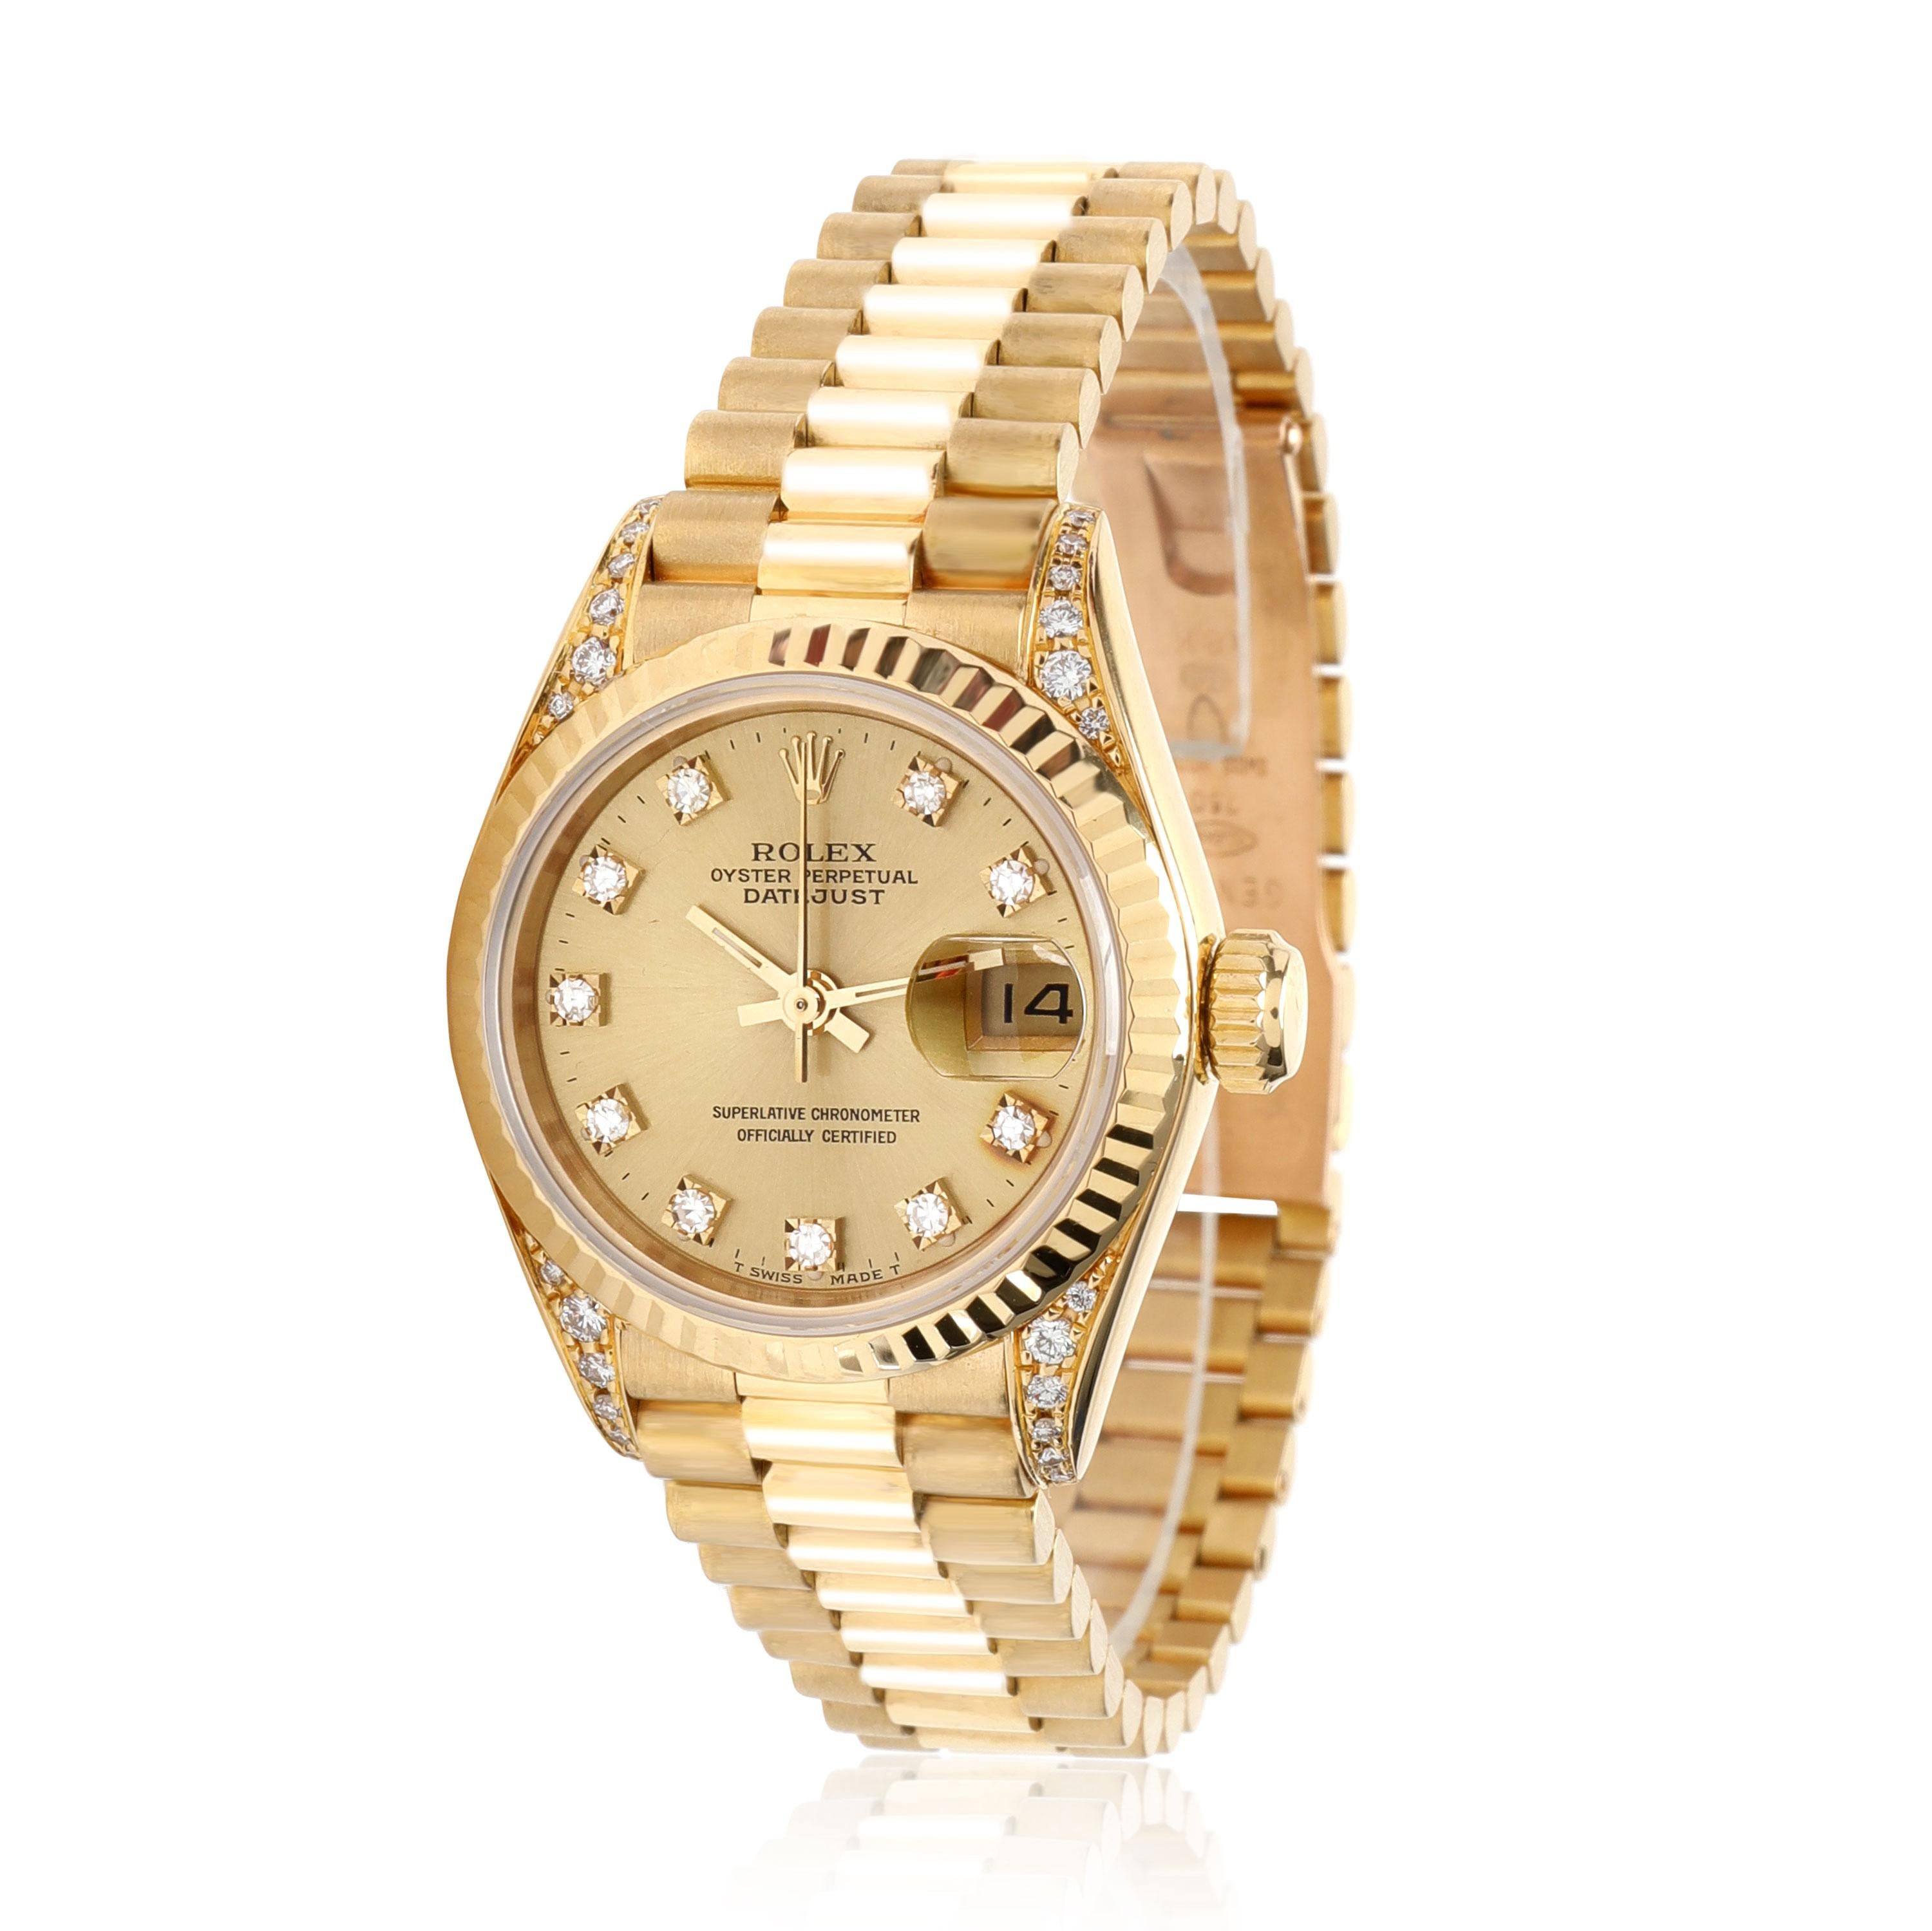 Rolex Datejust 69238 Women's Watch in 18kt Yellow Gold

SKU: 110808

PRIMARY DETAILS
Brand:  Rolex
Model: Datejust
Country of Origin: Switzerland
Movement Type: Mechanical: Automatic/Kinetic
Year Manufactured: 1991
Year of Manufacture: